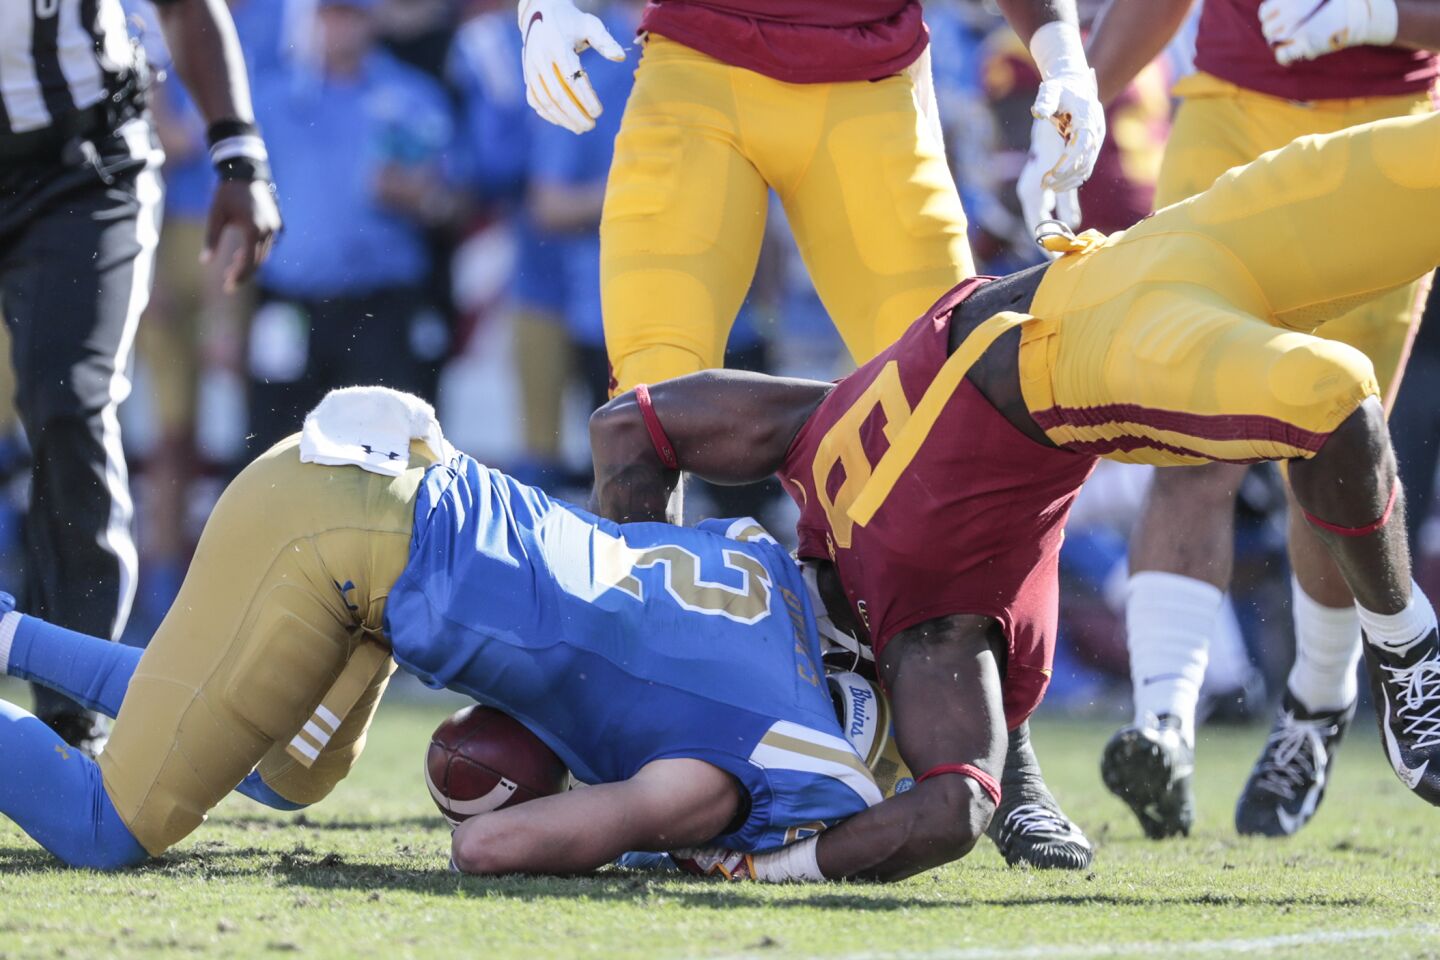 UCLA wide receiver Kyle Philips (2) is tackled by USC cornerback Greg Johnson (9) during first half action at the Coliseum on Saturday.